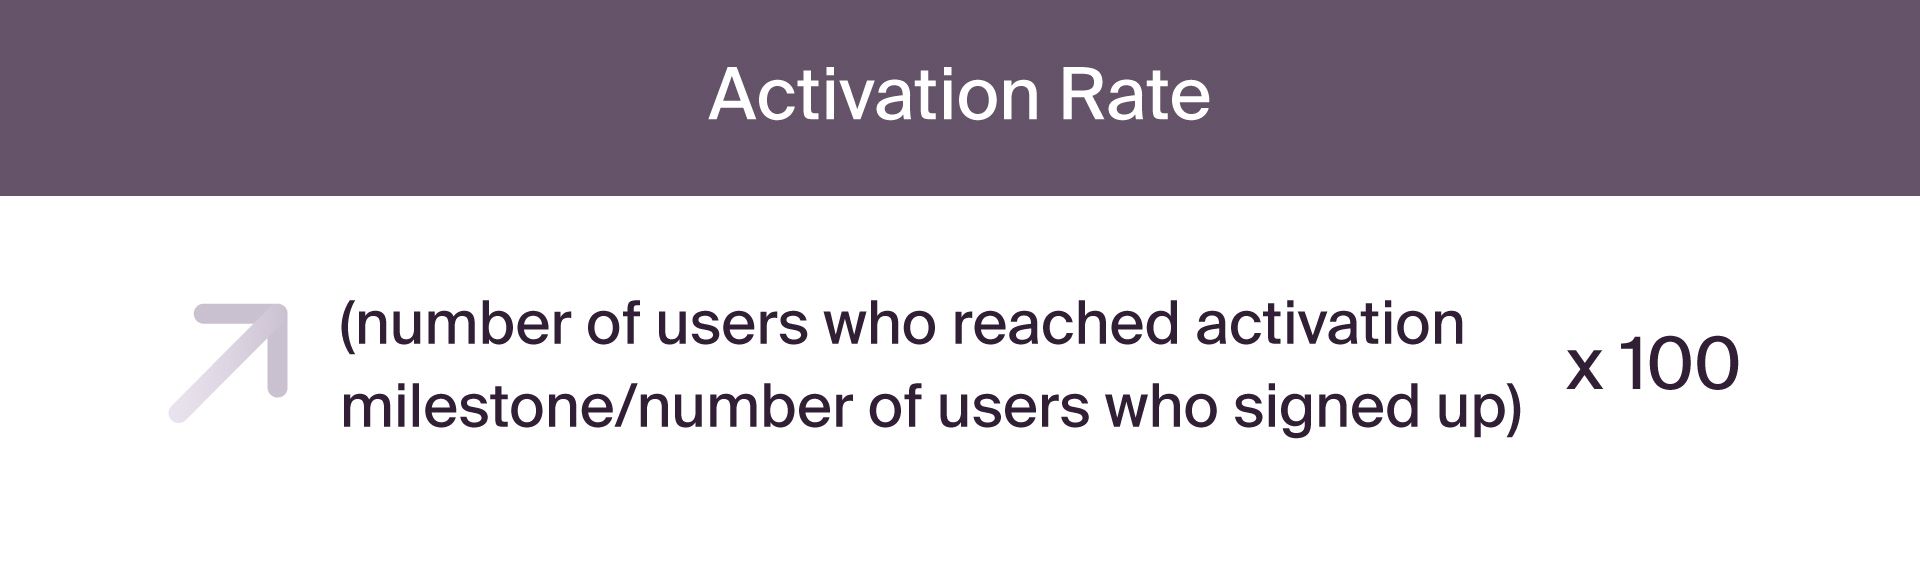 saas activation rate equation